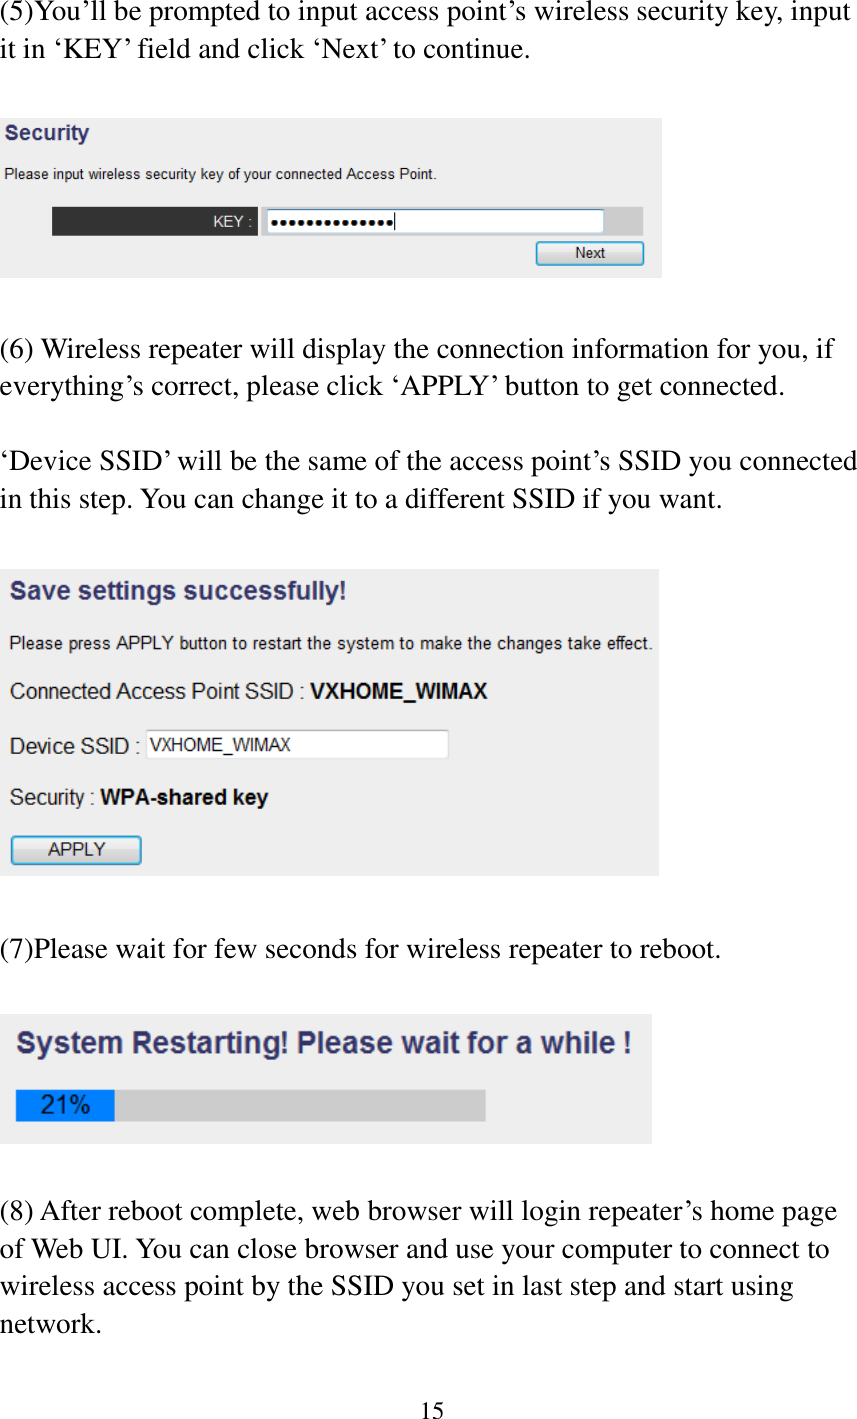 15   (5)You‟ll be prompted to input access point‟s wireless security key, input it in „KEY‟ field and click „Next‟ to continue.    (6) Wireless repeater will display the connection information for you, if everything‟s correct, please click „APPLY‟ button to get connected.  „Device SSID‟ will be the same of the access point‟s SSID you connected in this step. You can change it to a different SSID if you want.    (7)Please wait for few seconds for wireless repeater to reboot.      (8) After reboot complete, web browser will login repeater‟s home page of Web UI. You can close browser and use your computer to connect to wireless access point by the SSID you set in last step and start using network.  